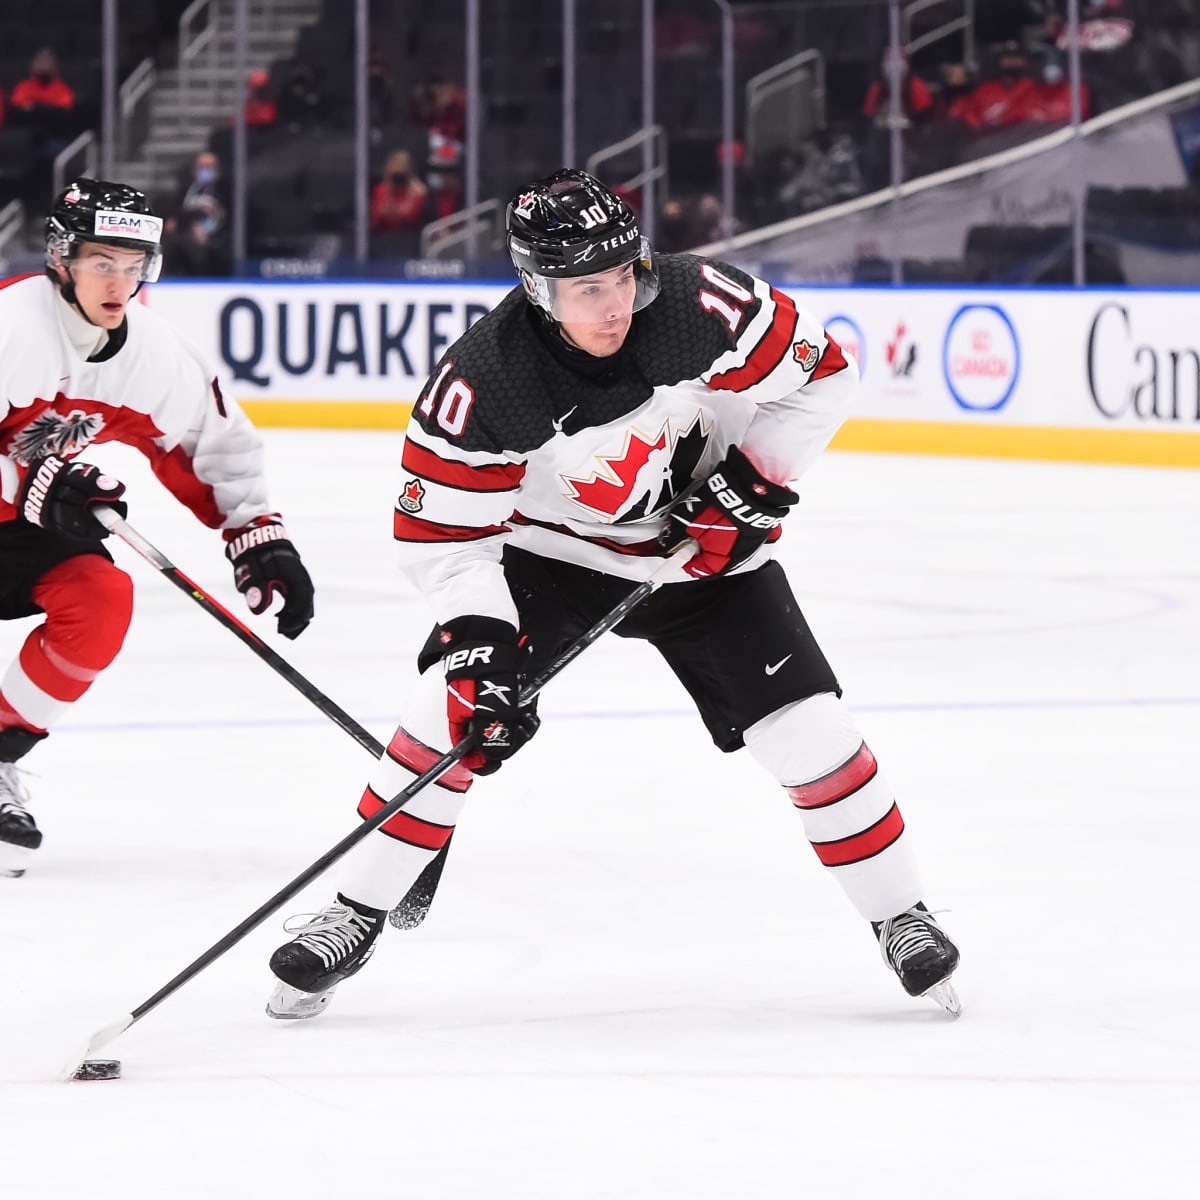 Oil Kings alumnus Dylan Guenther to represent Canada at 2023 IIHF World  Junior Hockey Championship - Edmonton Oil Kings